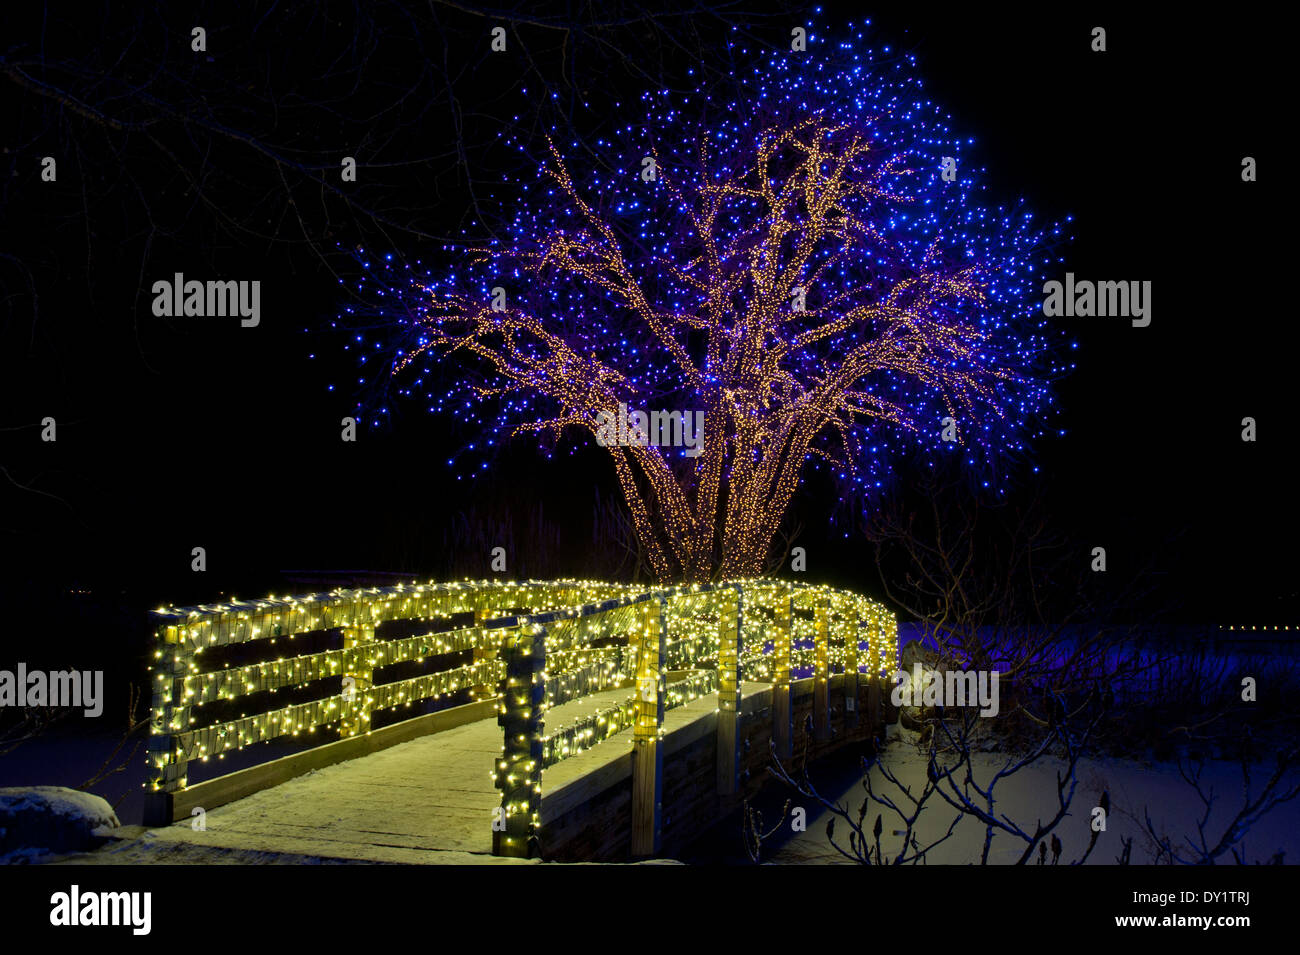 Here a cottonwood tree is entirely decked out in Christmas lights, as is the bridge over the frozen creek in the foreground. Stock Photo